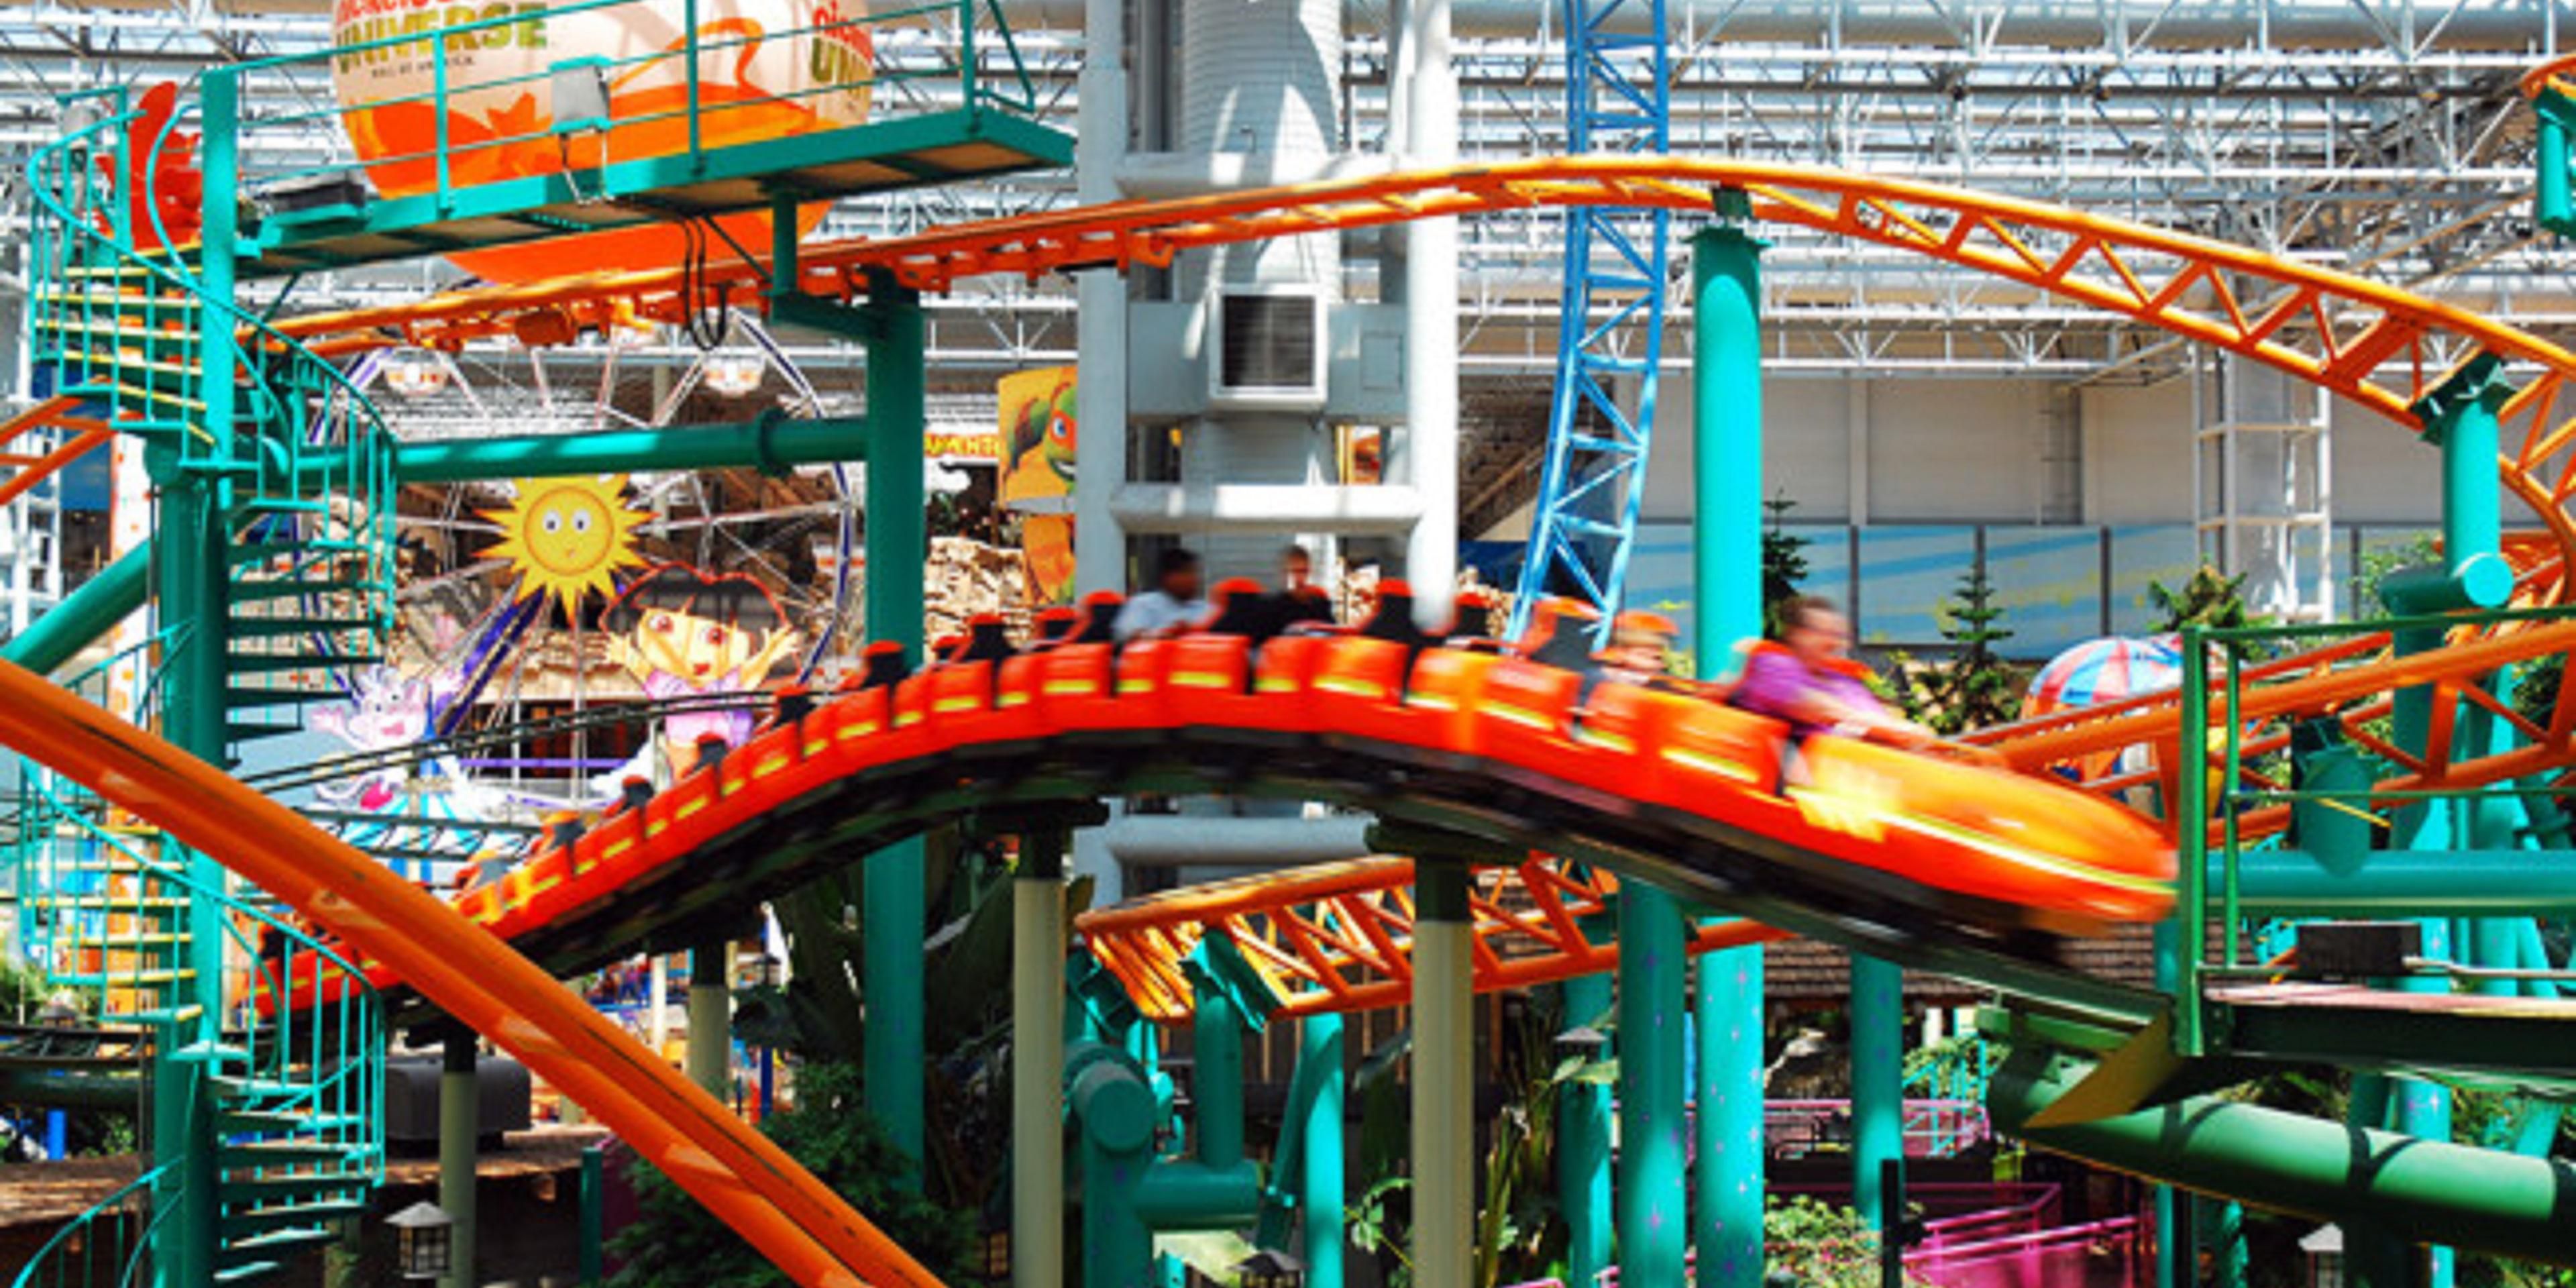 Take our complimentary shuttle to the Mall of America where you can enjoy the Nickelodeon Universe Indoor theme park. The theme park which is open year round has over 27 rides including 5 roller-coasters. 

Please see front desk for information on discounted tickets.